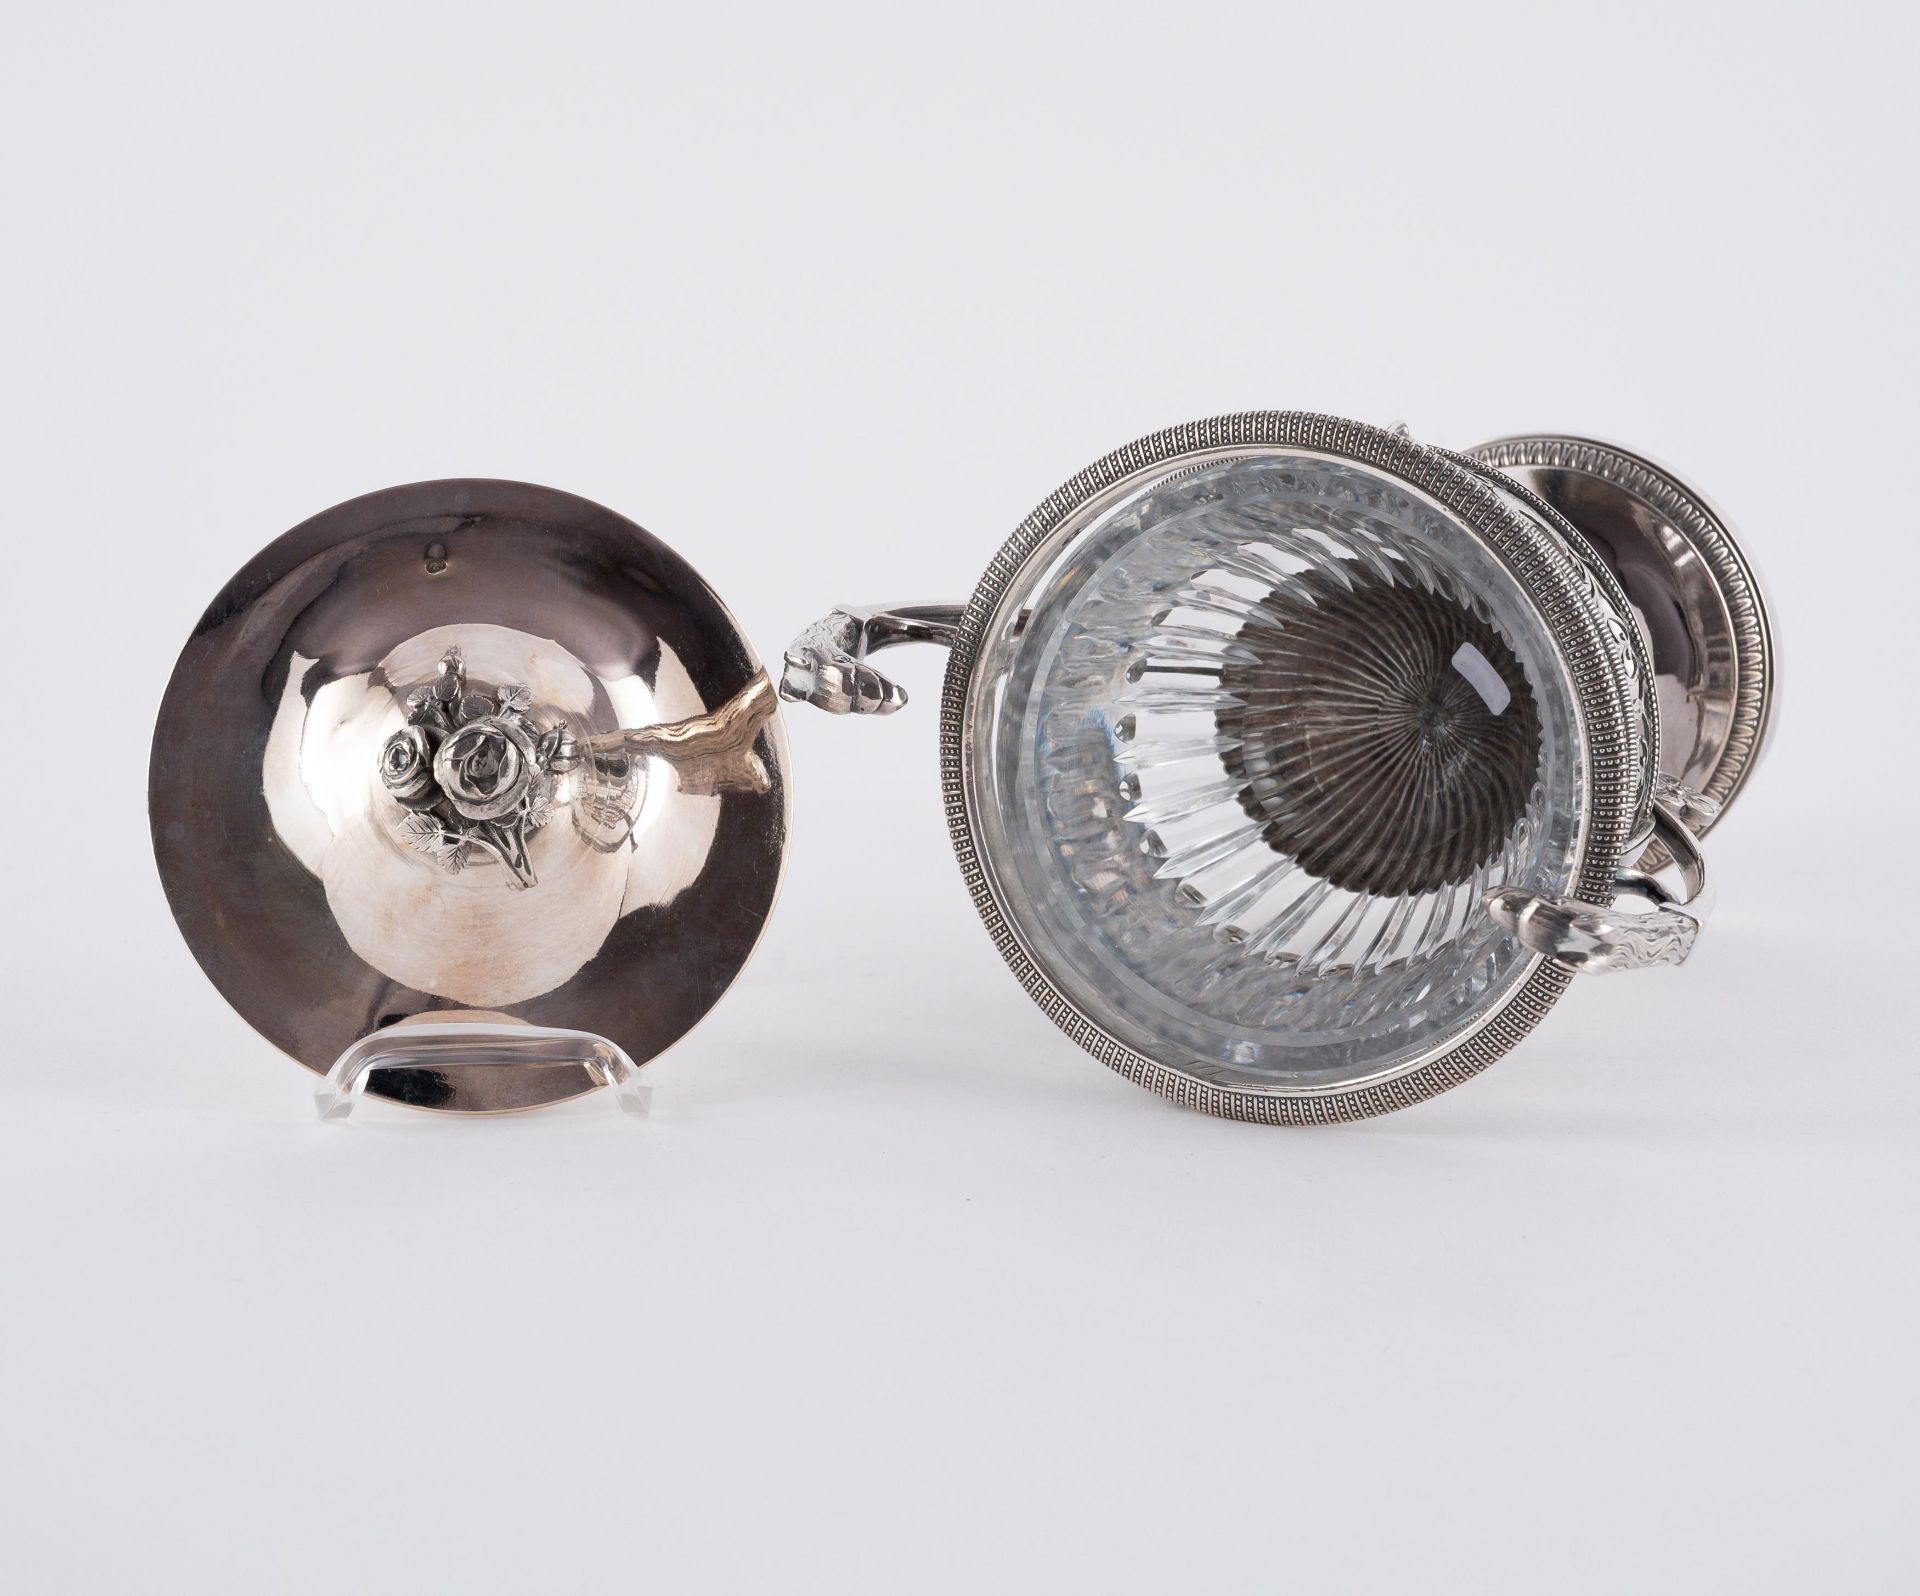 Nicolas-Richard Masson: FOOTED-SILVER SUGAR VESSEL WITH MASCARONS - Image 5 of 6